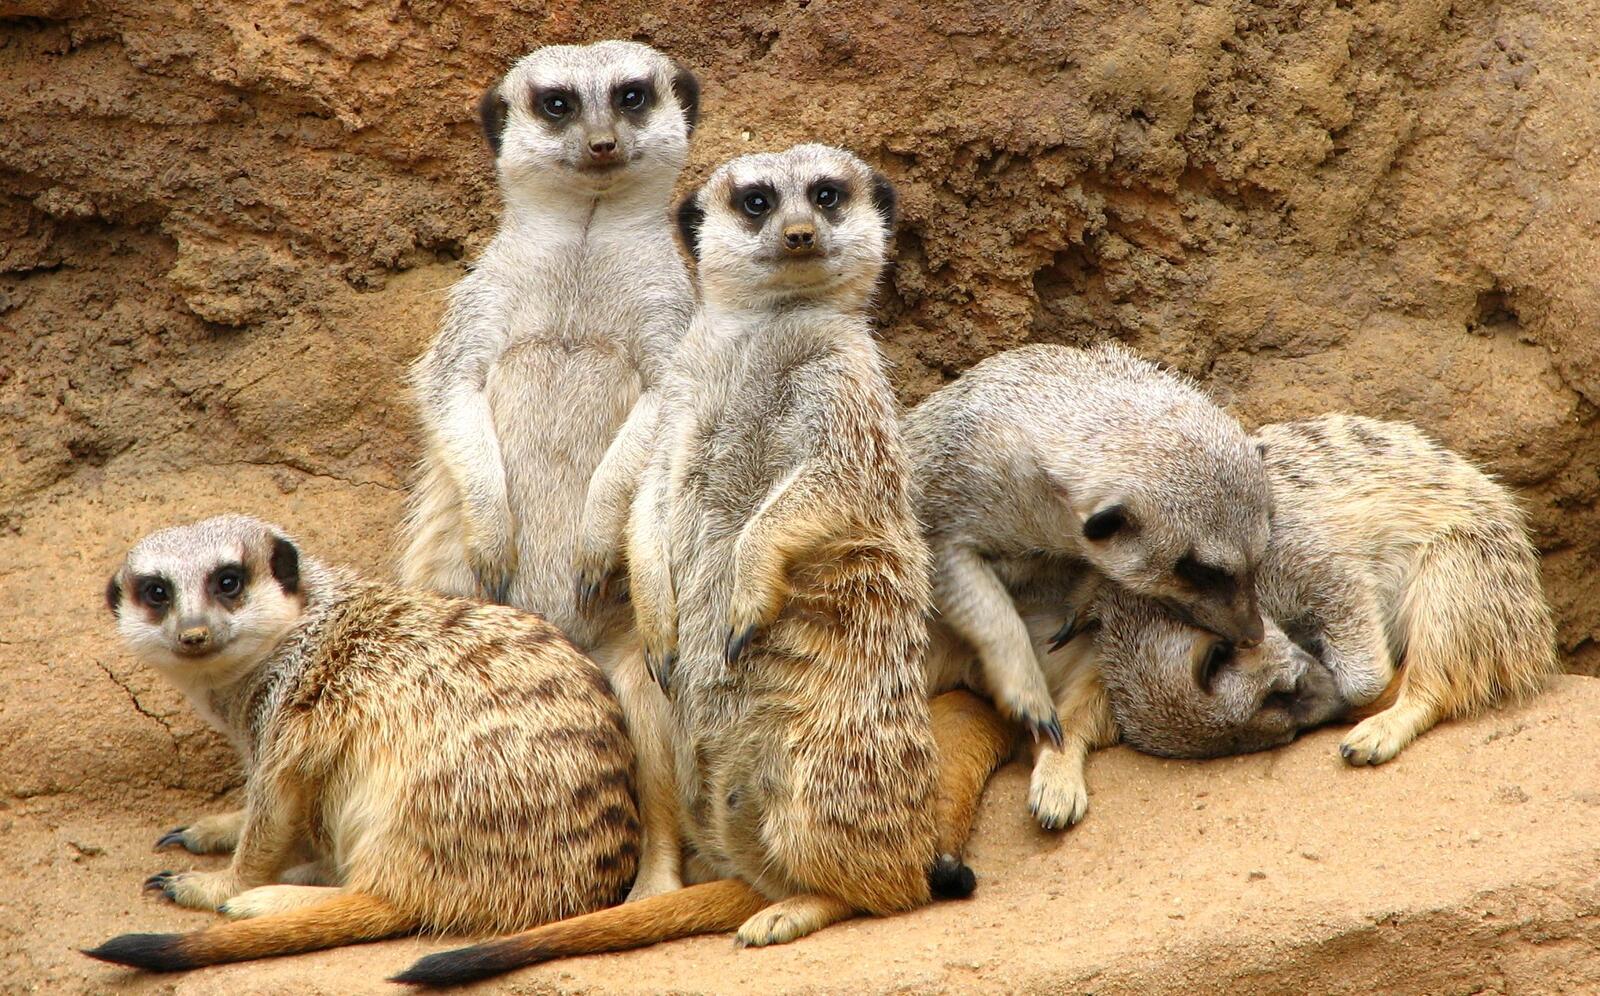 Wallpapers meerkats suricata seeds as well as insects on the desktop